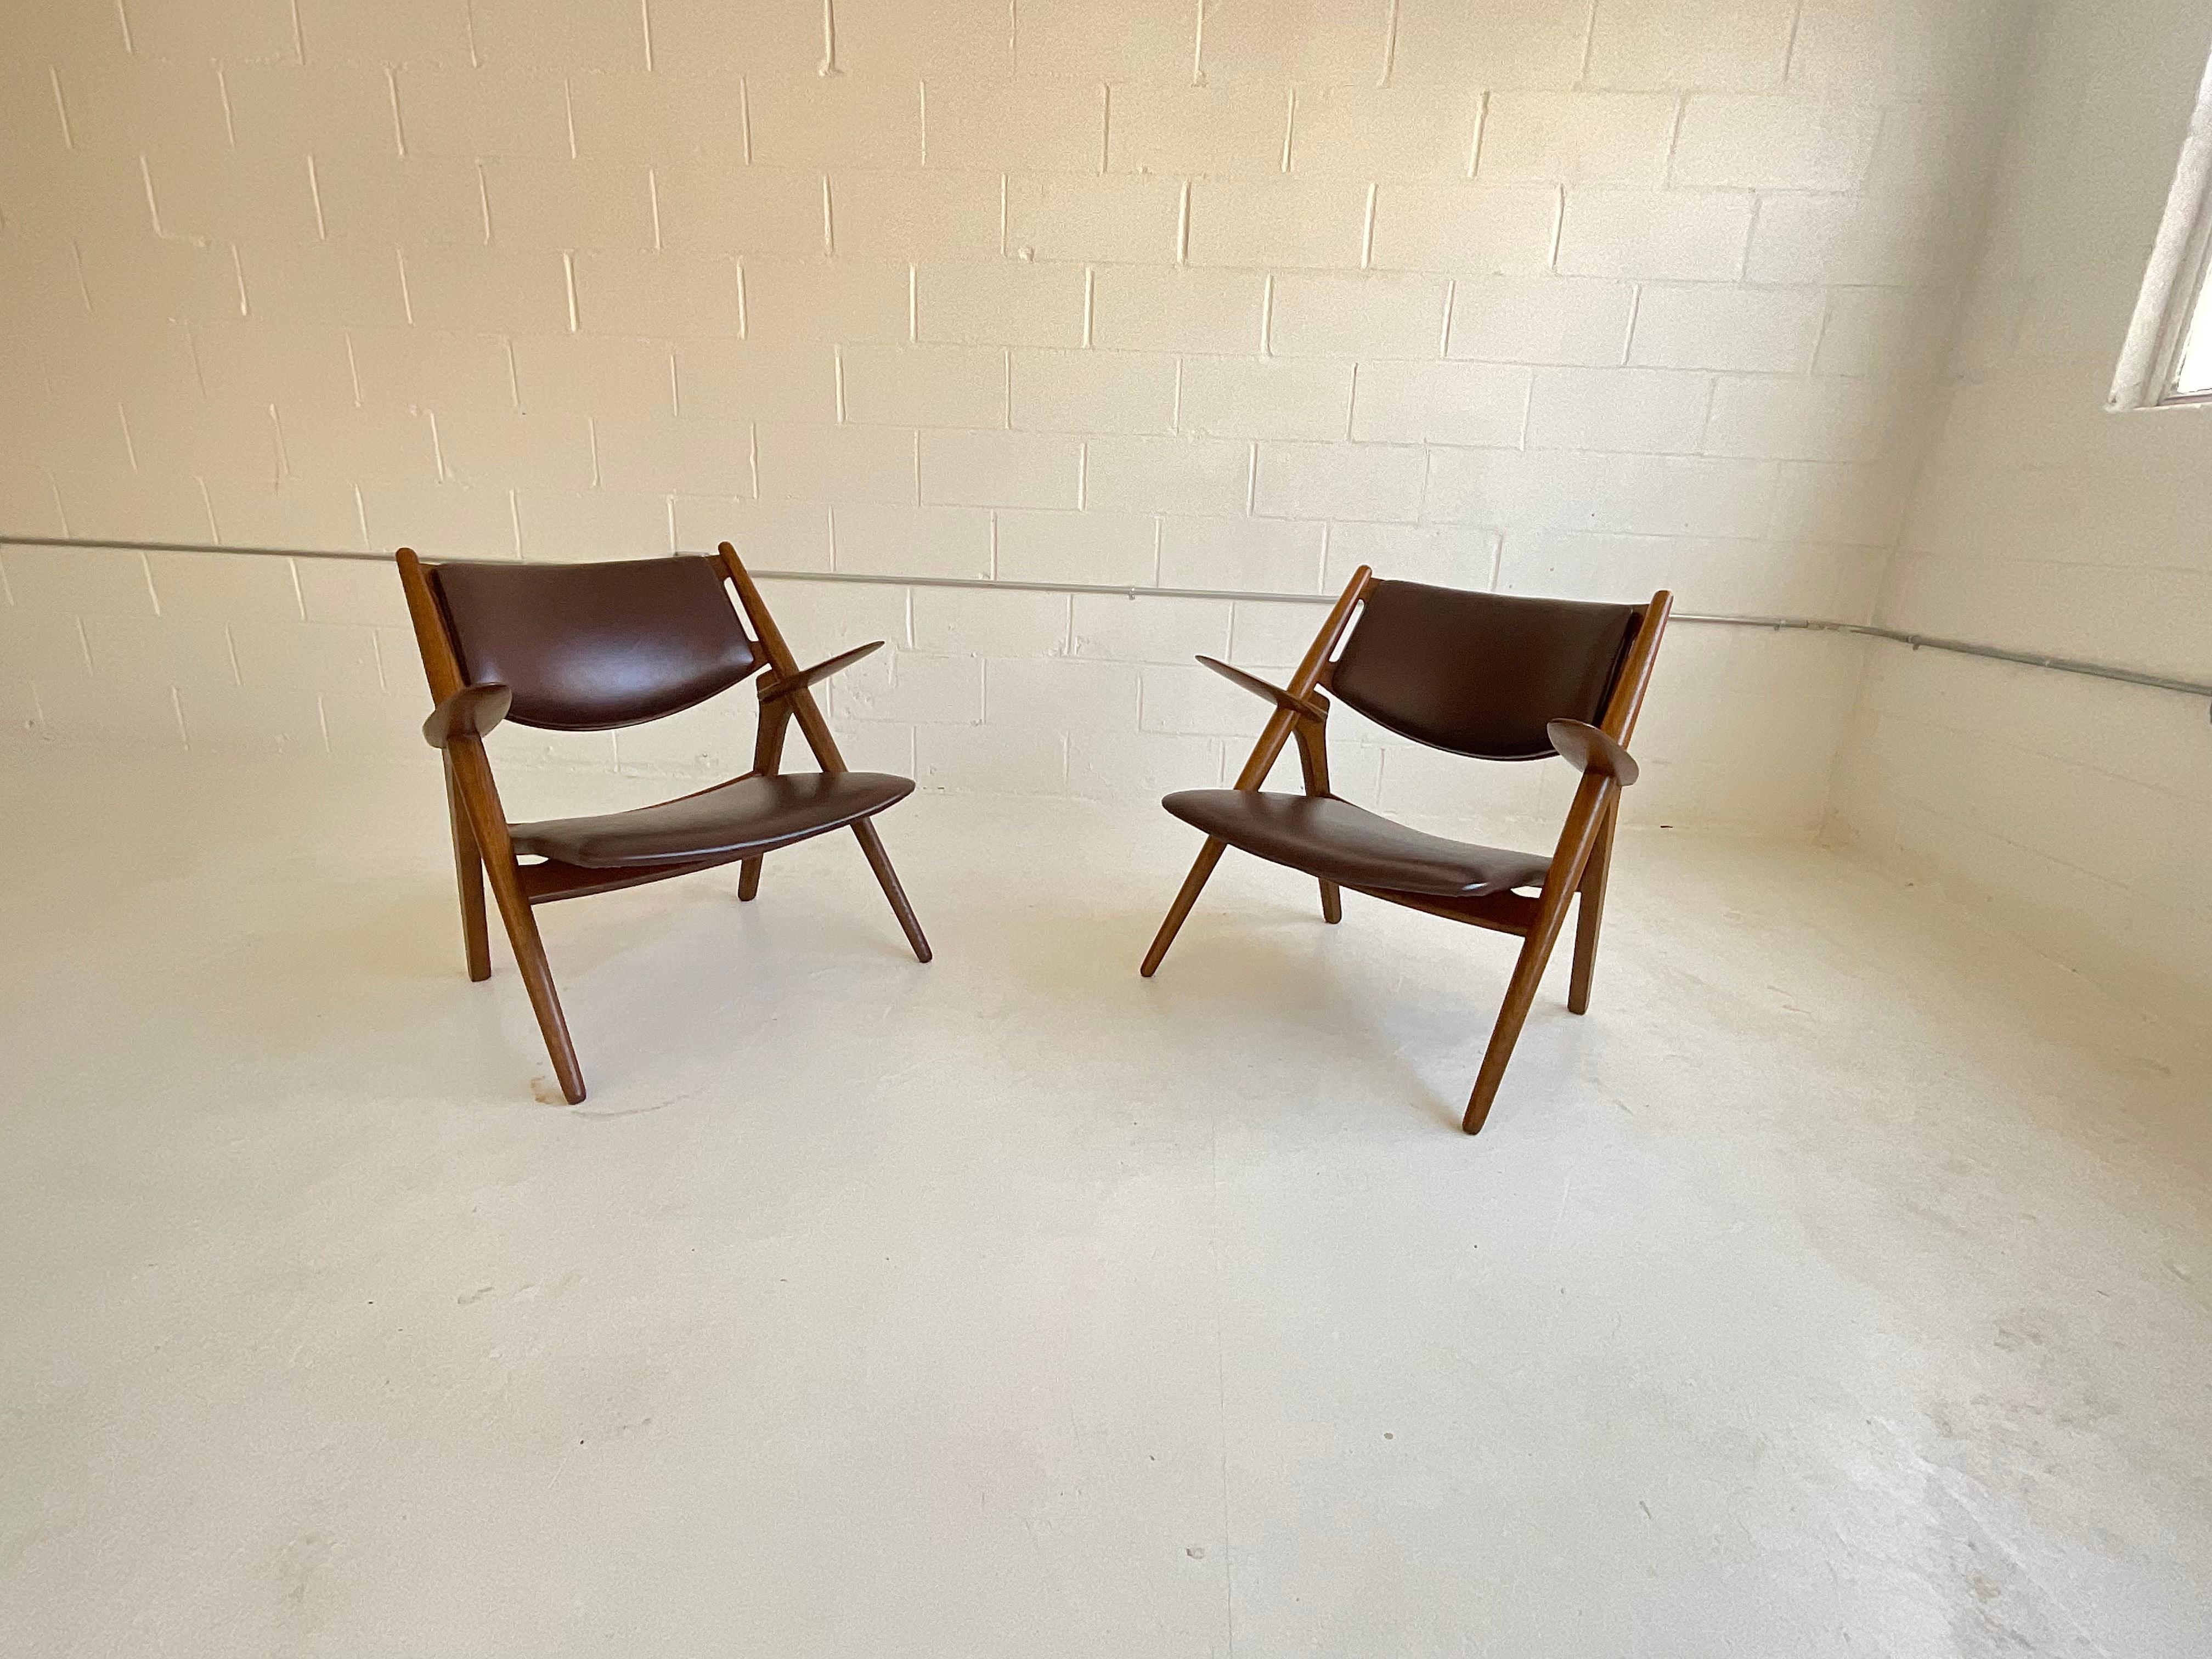 Hans Wegner Vintage Sawbuck Chairs for Carl Hansen CH28 in Oak & Leather, 1951 For Sale 9